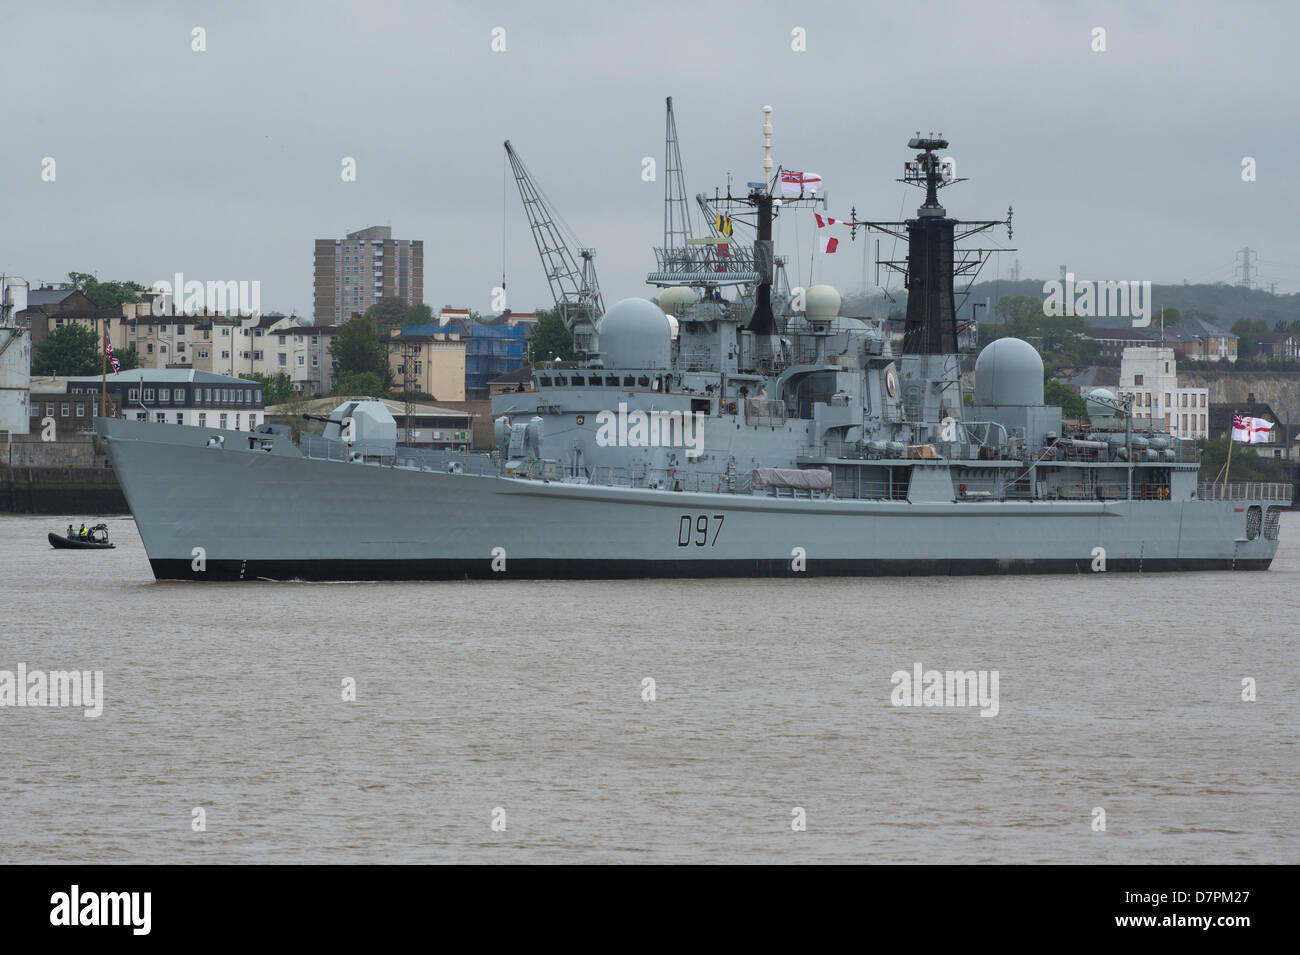 The British Naval ship HMS Edinburgh a type 42 destroyer in the River Thames, en-route to Leth, Scotland to be decommissioned. Stock Photo